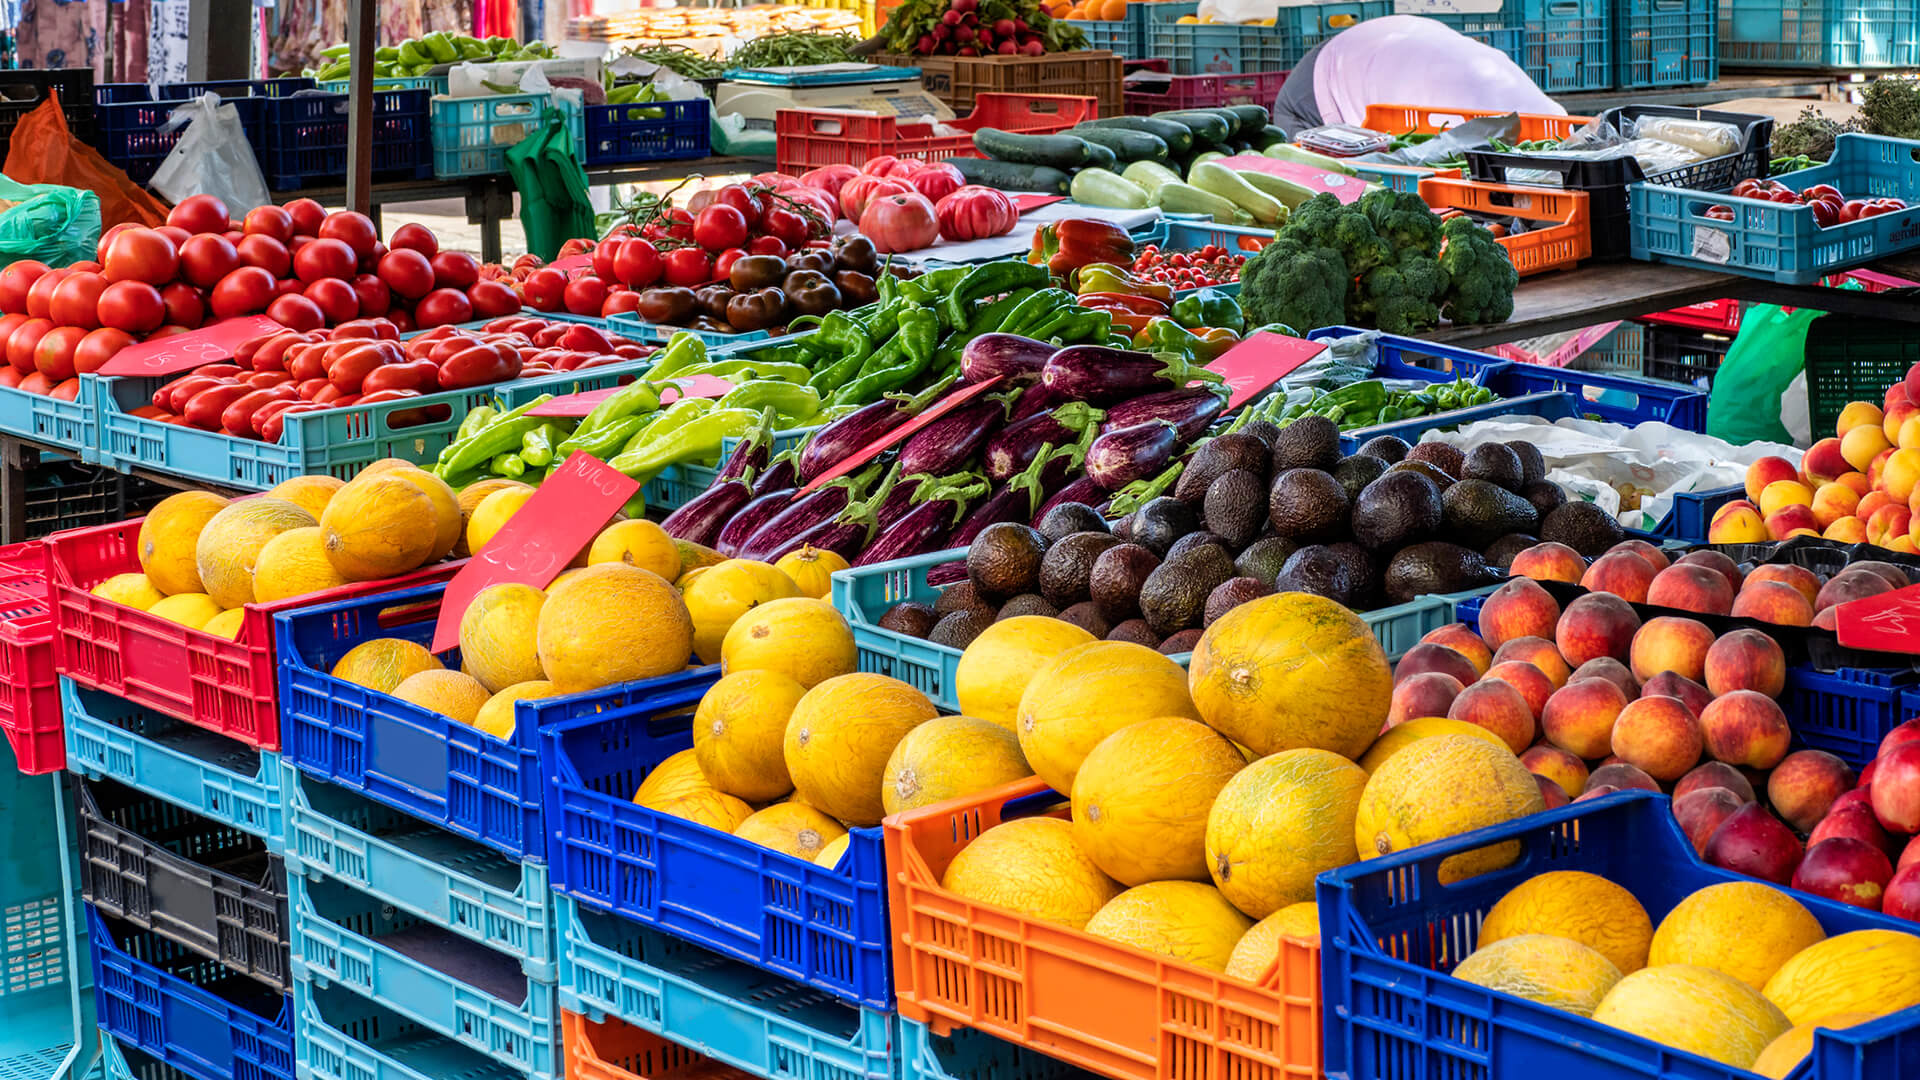 Healthy foods are best for the environment, new research finds